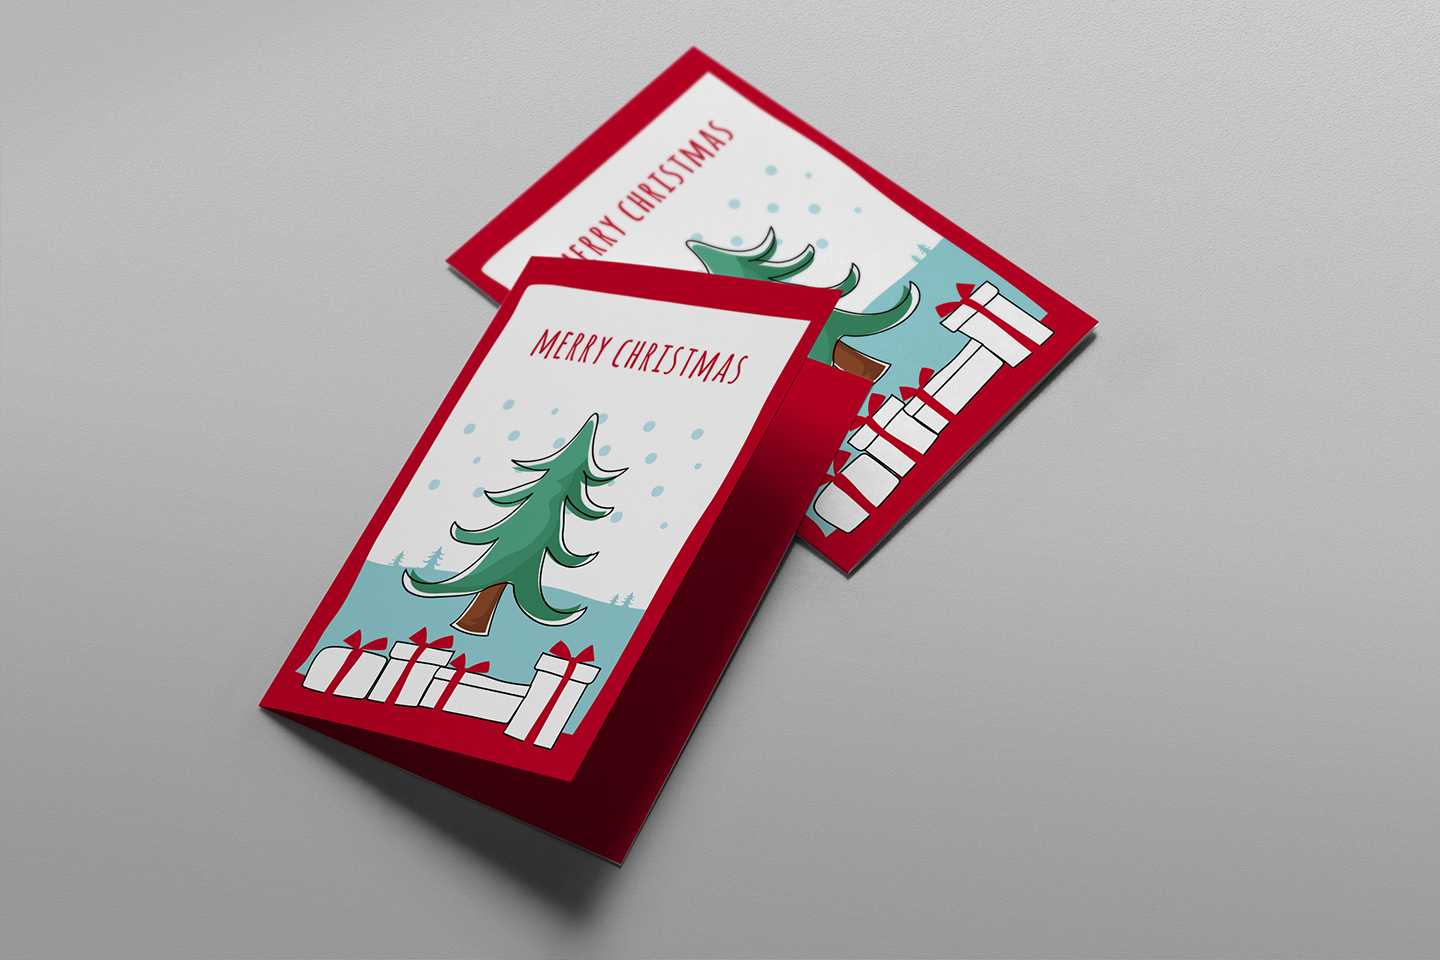 Free Christmas Card Templates For Photoshop & Illustrator In Free Christmas Card Templates For Photoshop